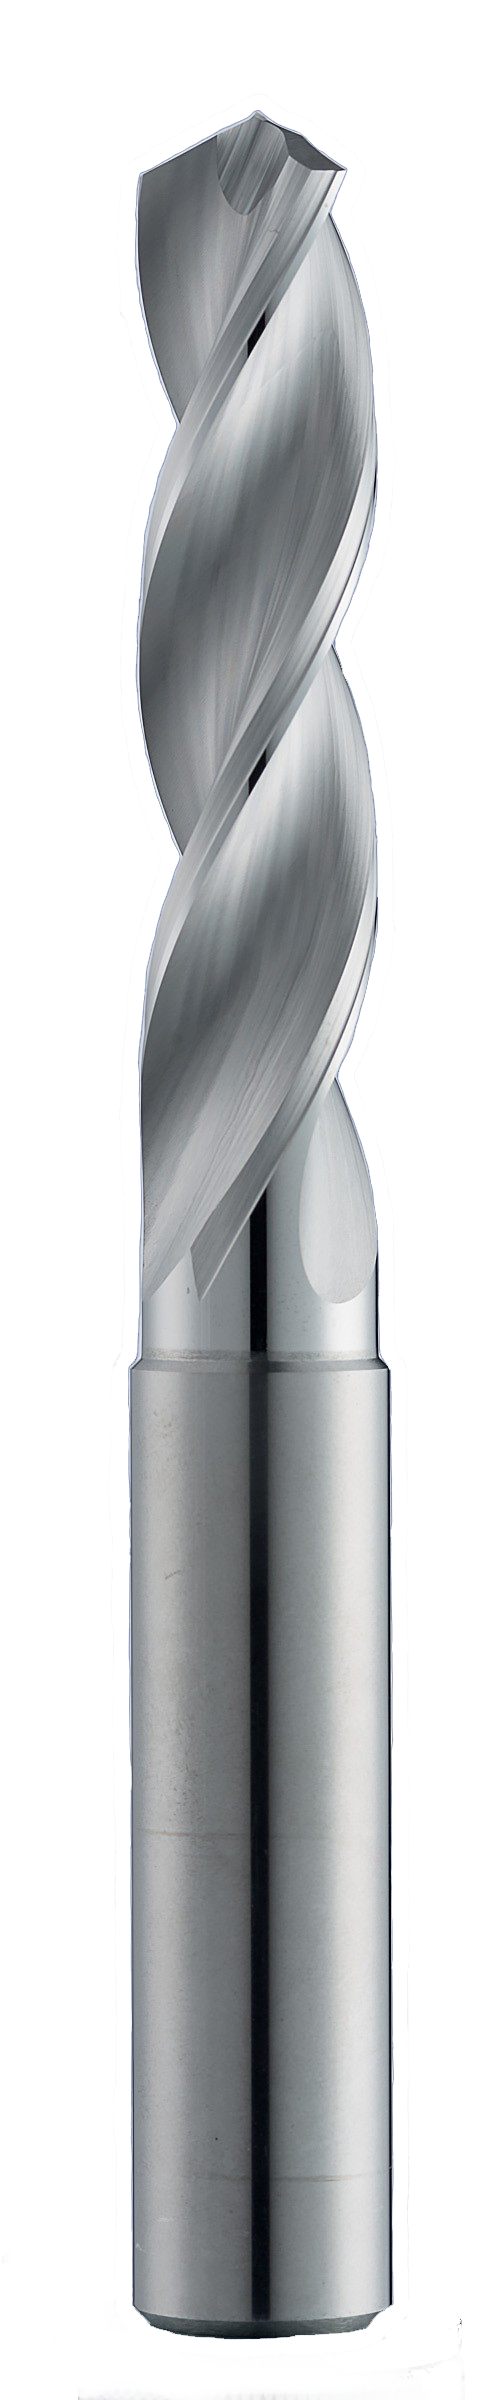 5.30mm Dia, 124 Degree Point, Solid Carbide Drill - 64823